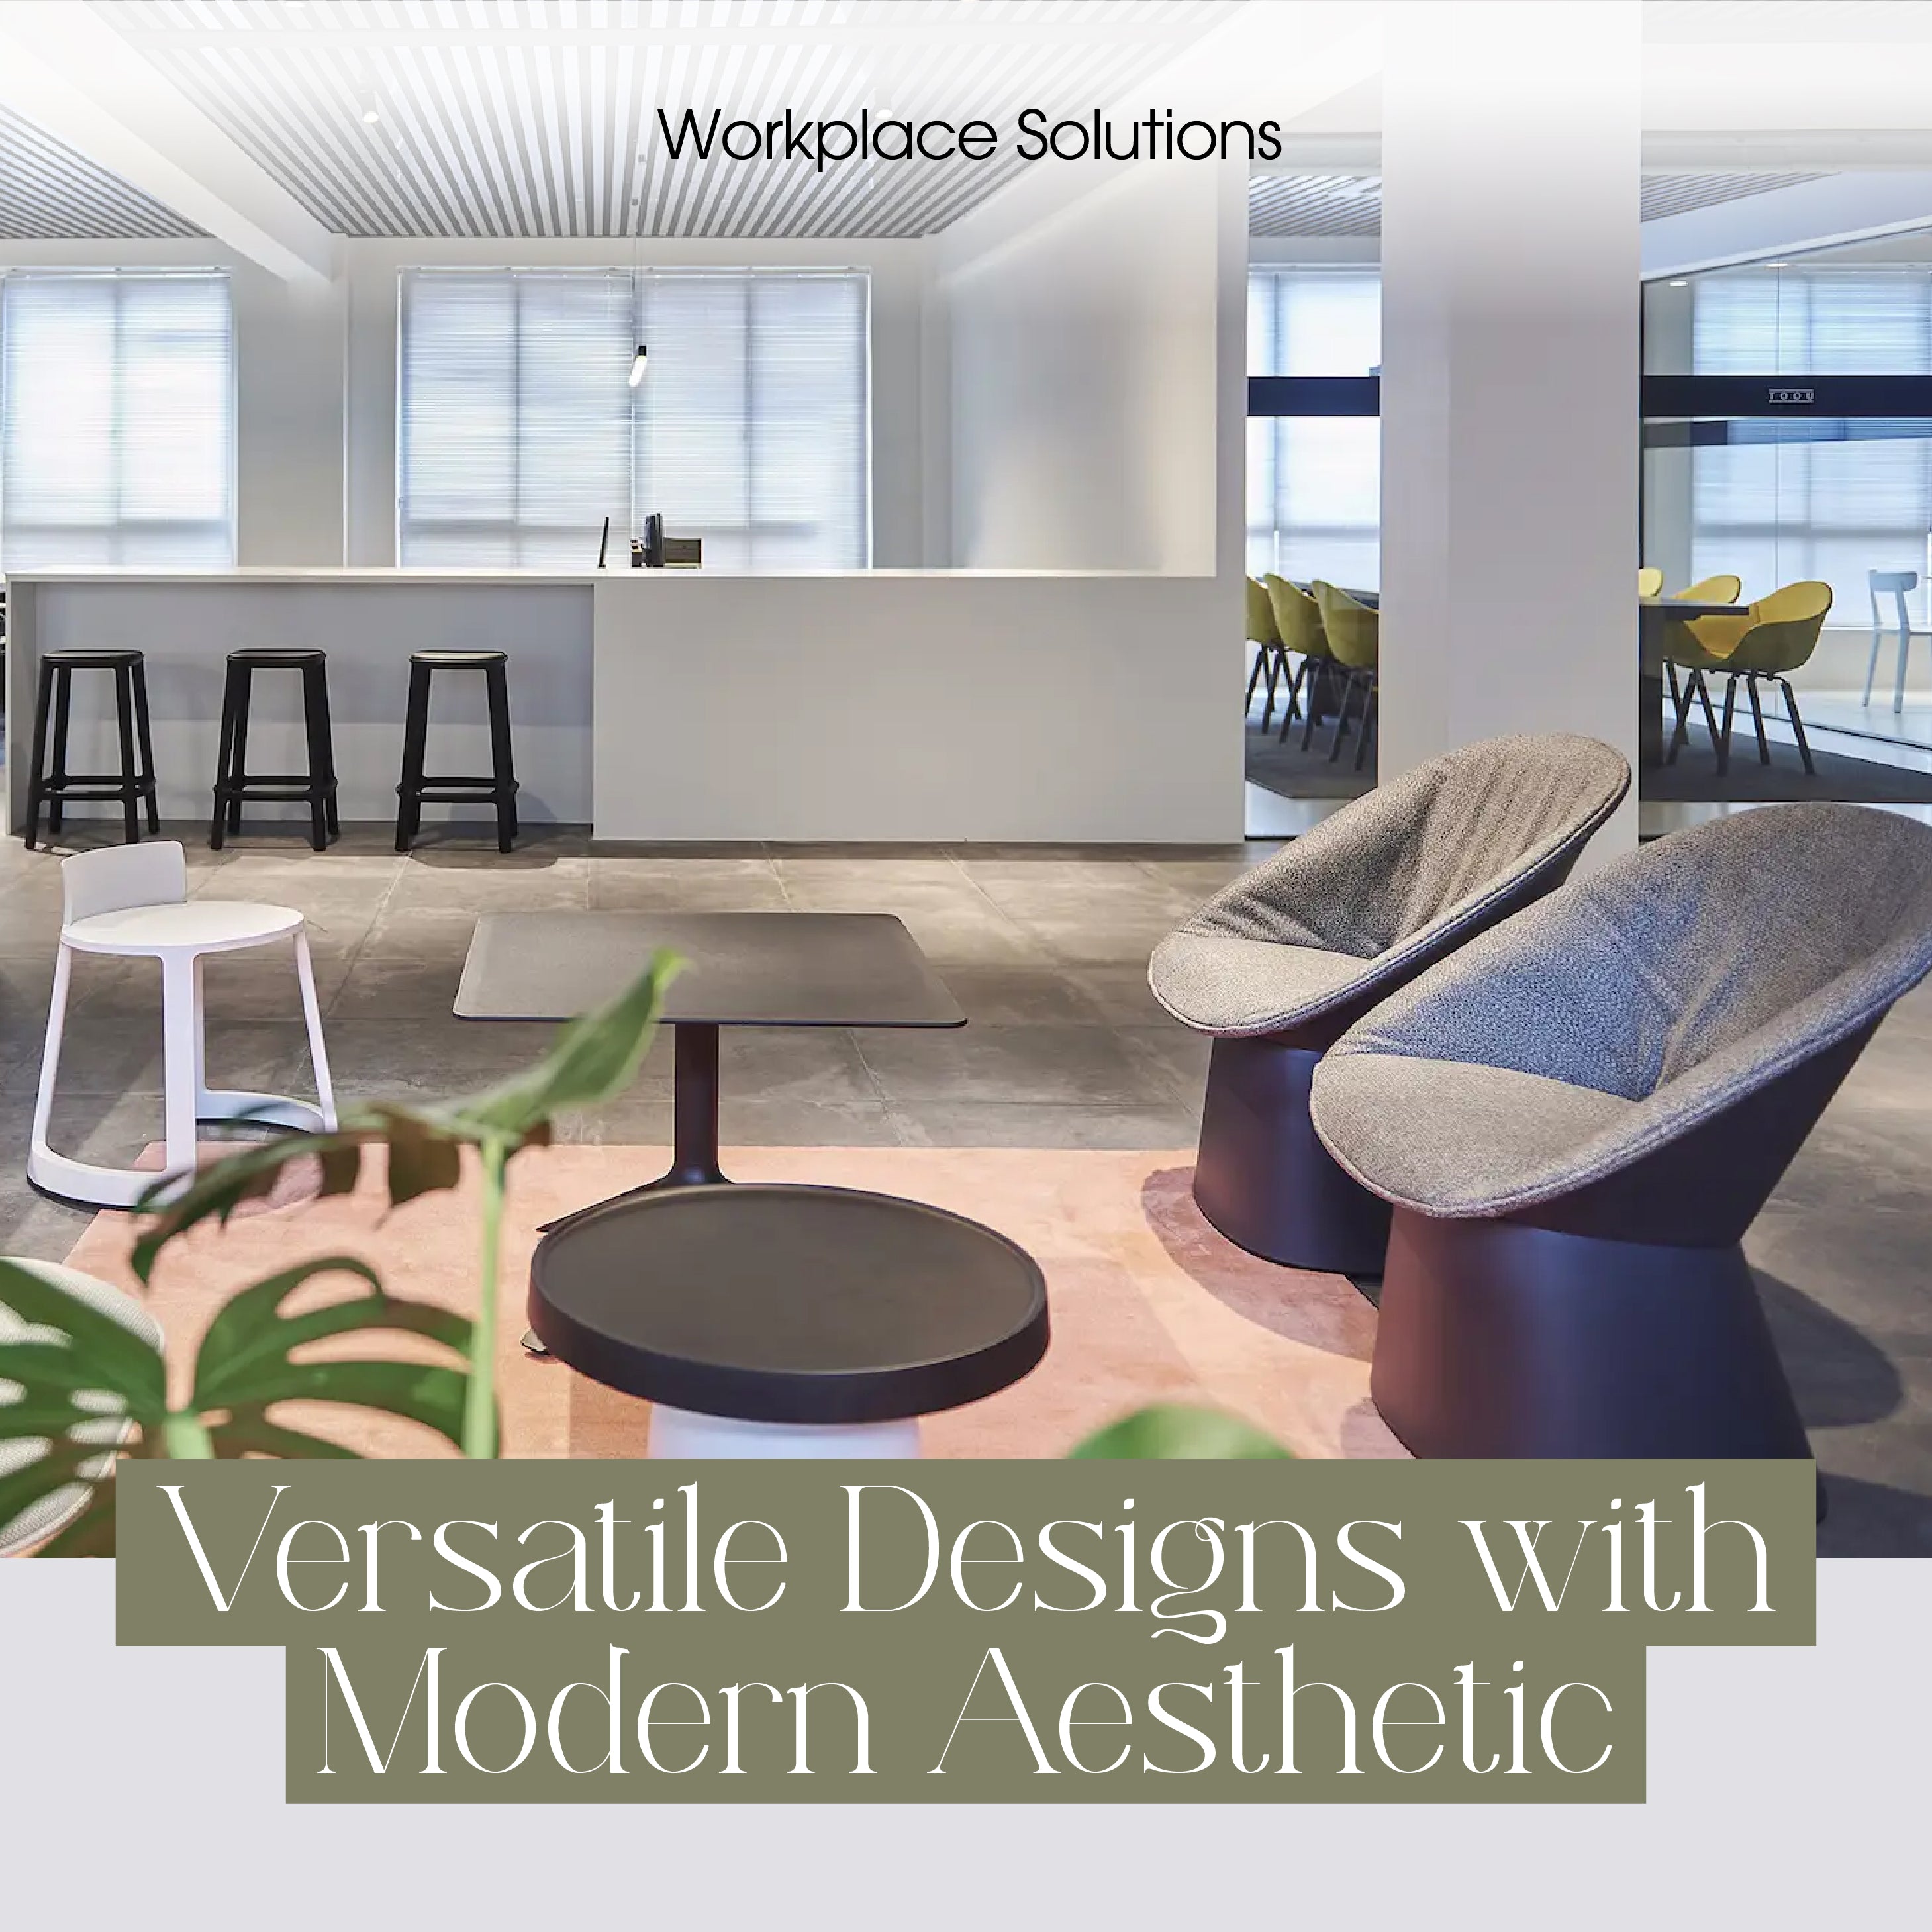 COLOURLIVING | WORKPLACE SOLUTIONS | VERSATILE DESIGNS WITH MODERN AESTHETIC